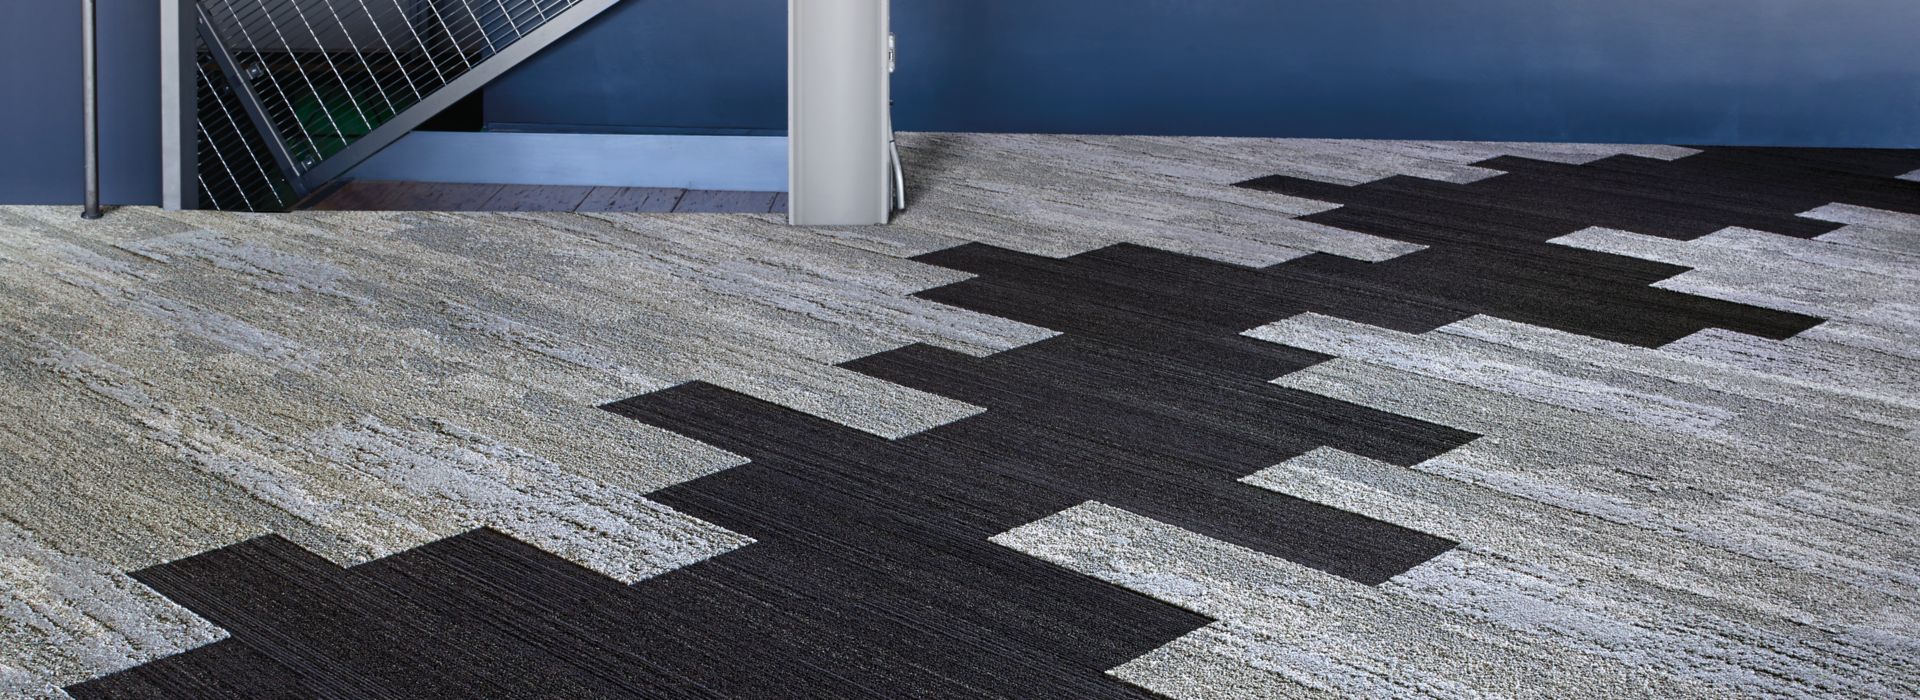 Interface NF400 and NF401 plank carpet tile in a corridor or entryway of a public space